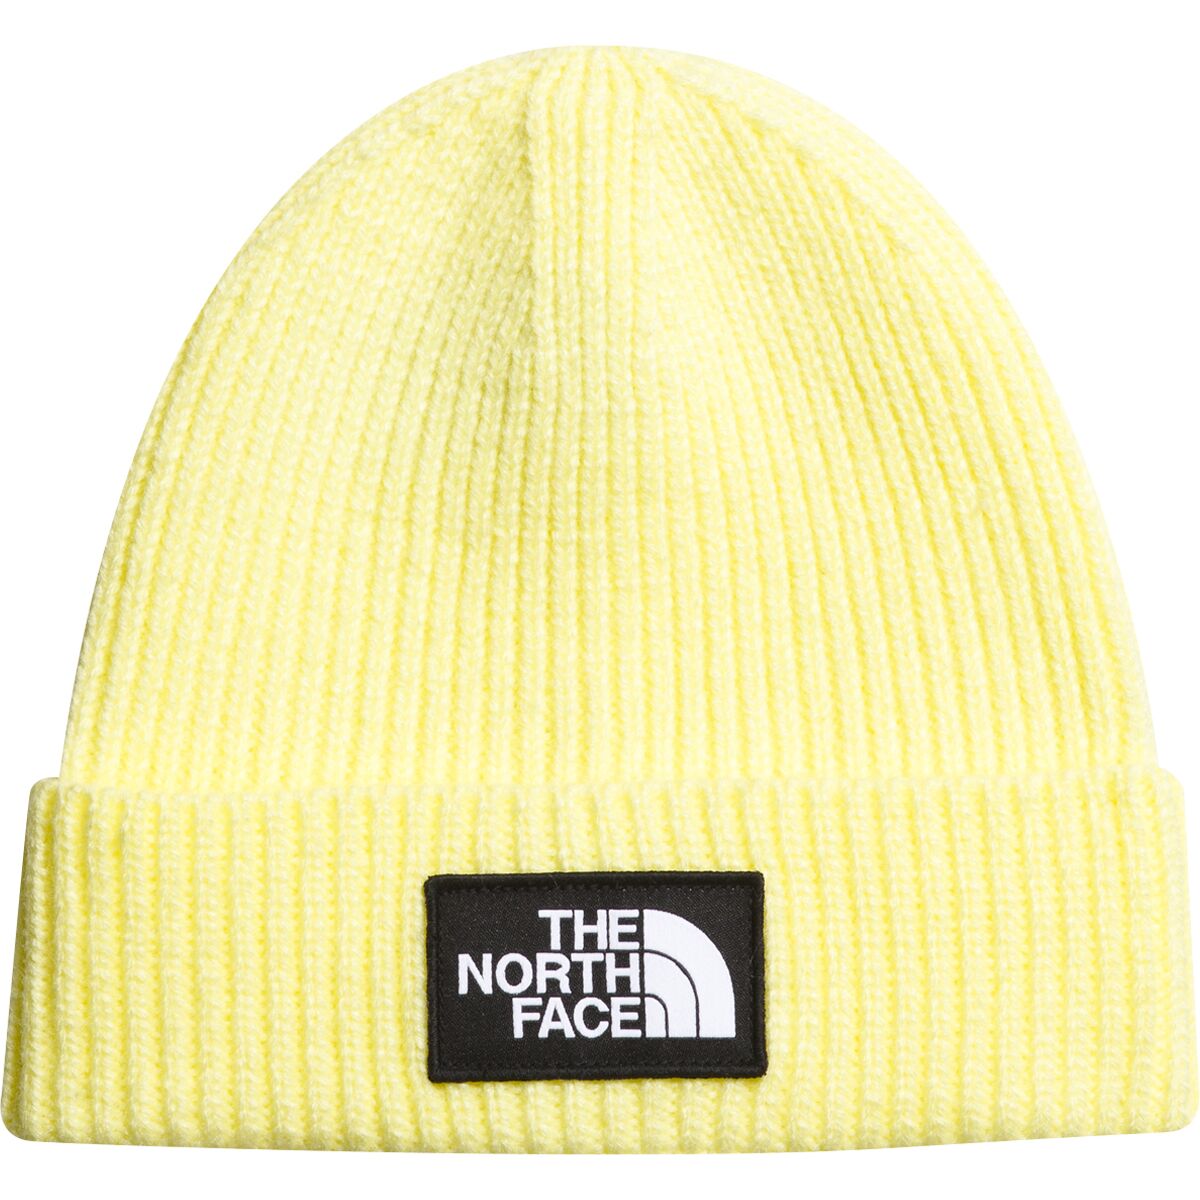 NEW The North Face Beanie Adult One Size Coral Black TNF Box Logo Knit Cap  Hat